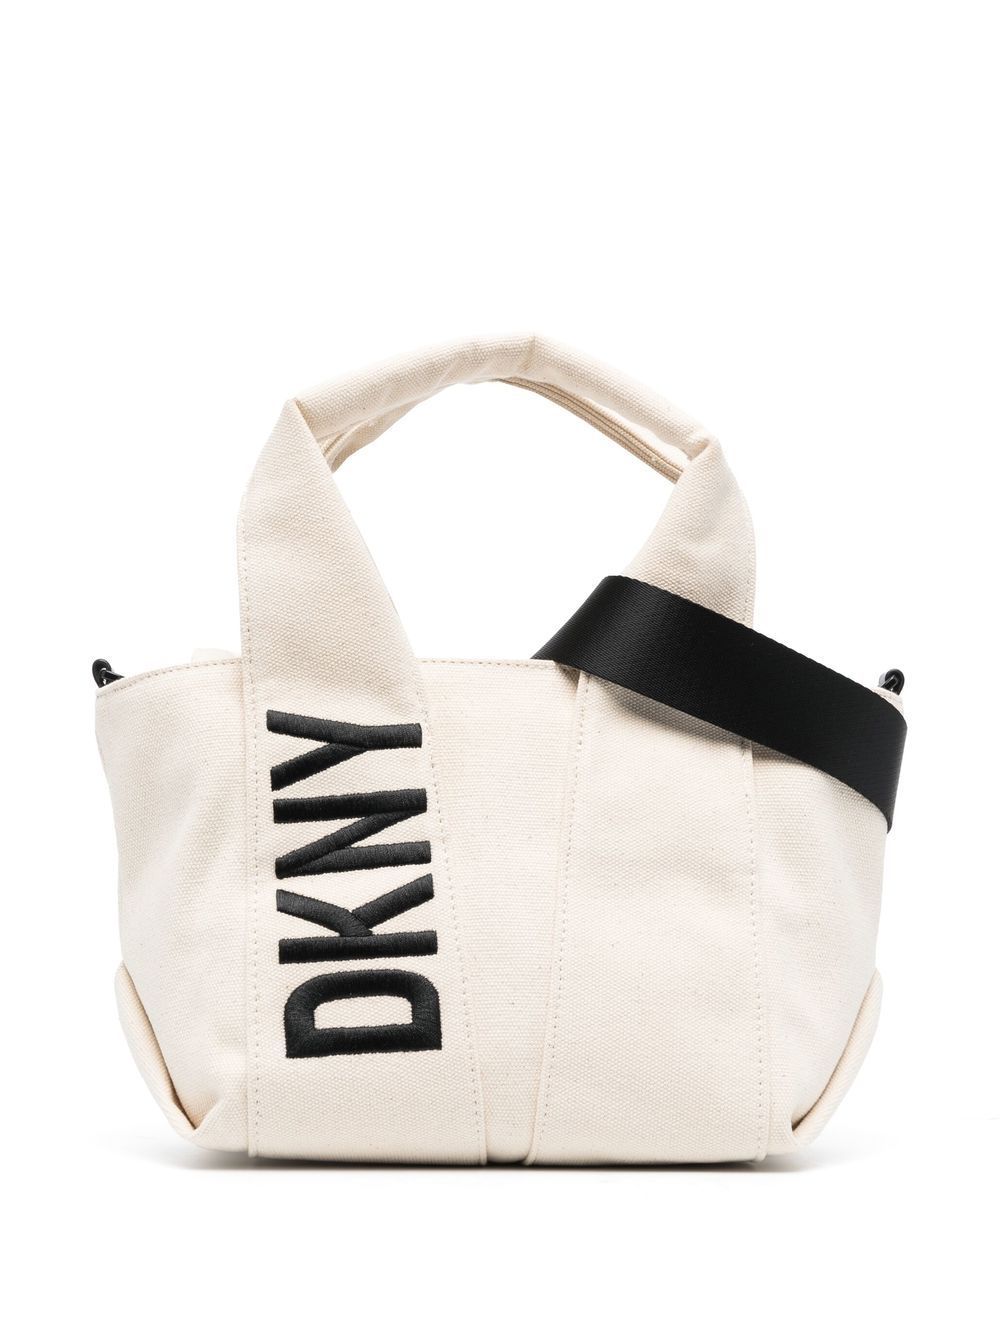 City Chic: Discover the Urban Elegance of DKNY Bags